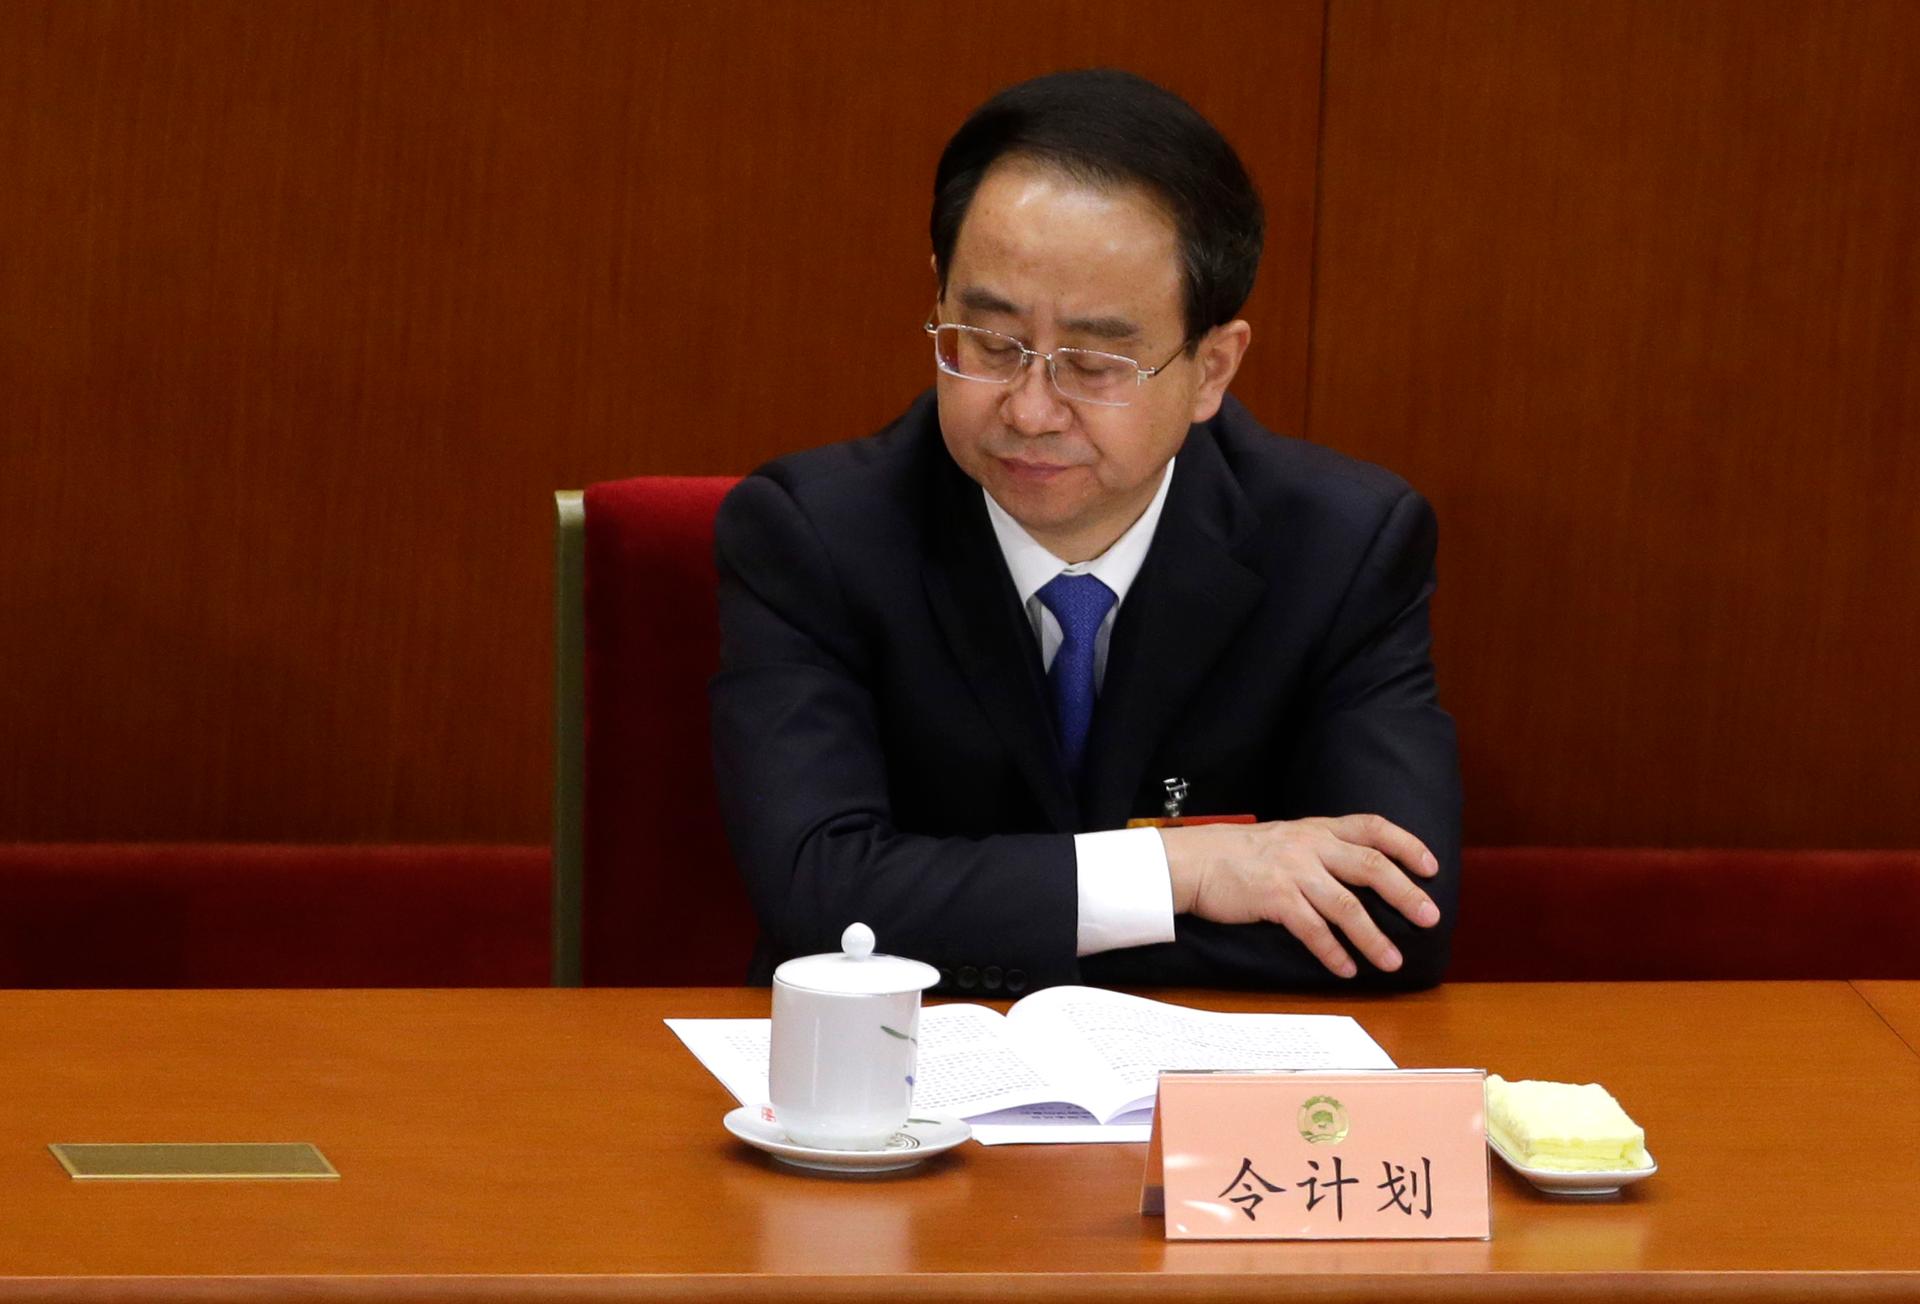 Ling Jihua, newly elected vice chairman of the Chinese People's Political Consultative Conference (CPPCC), pauses while attending the opening ceremony of the CPPCC at the Great Hall of the People in Beijing March 3, 2013.  